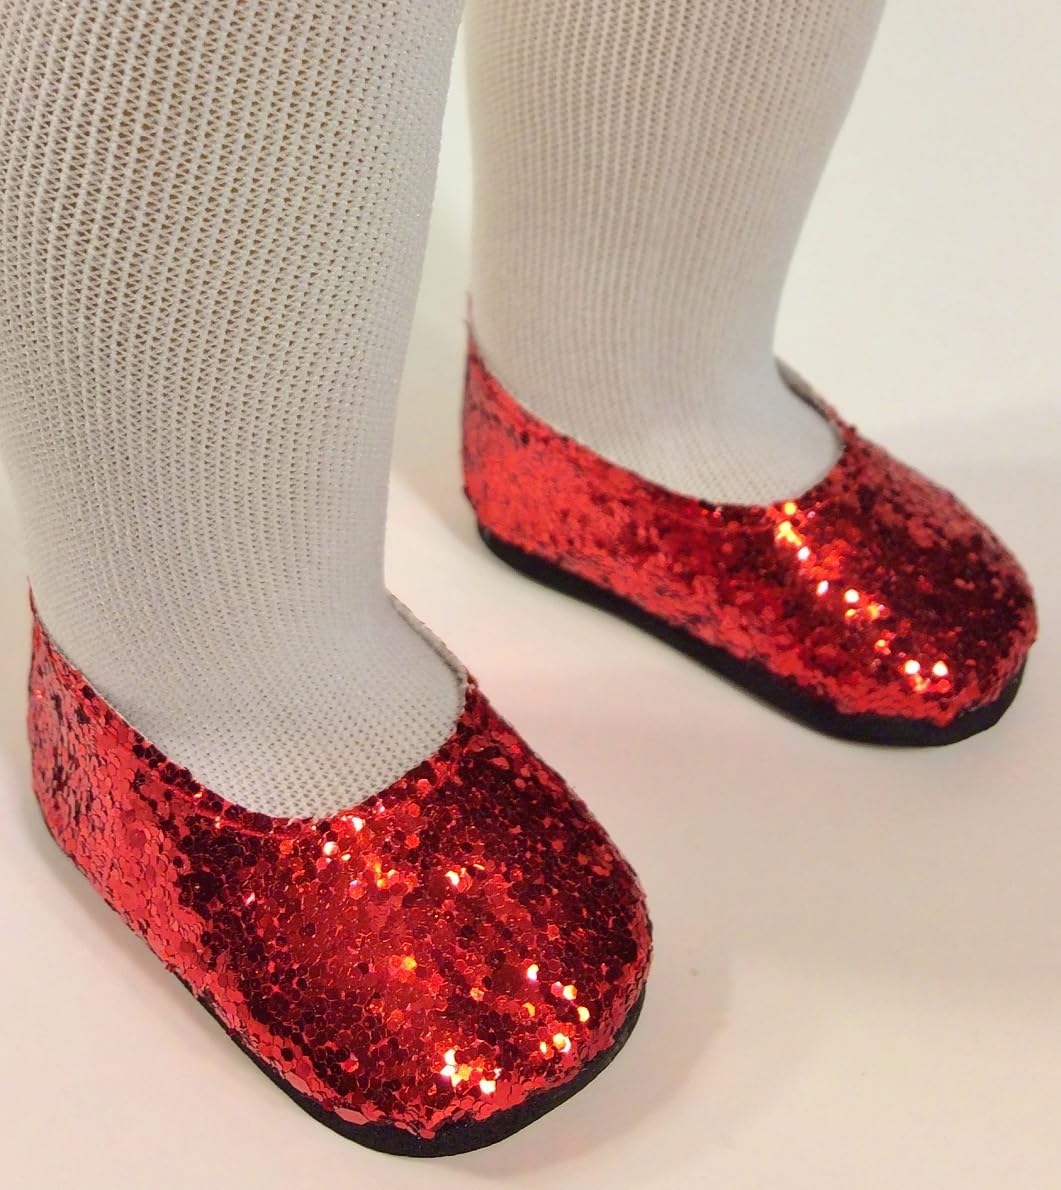 18" Doll Shoes - Red, Silver, Black - Sparkle Glitter for American Girl Dolls